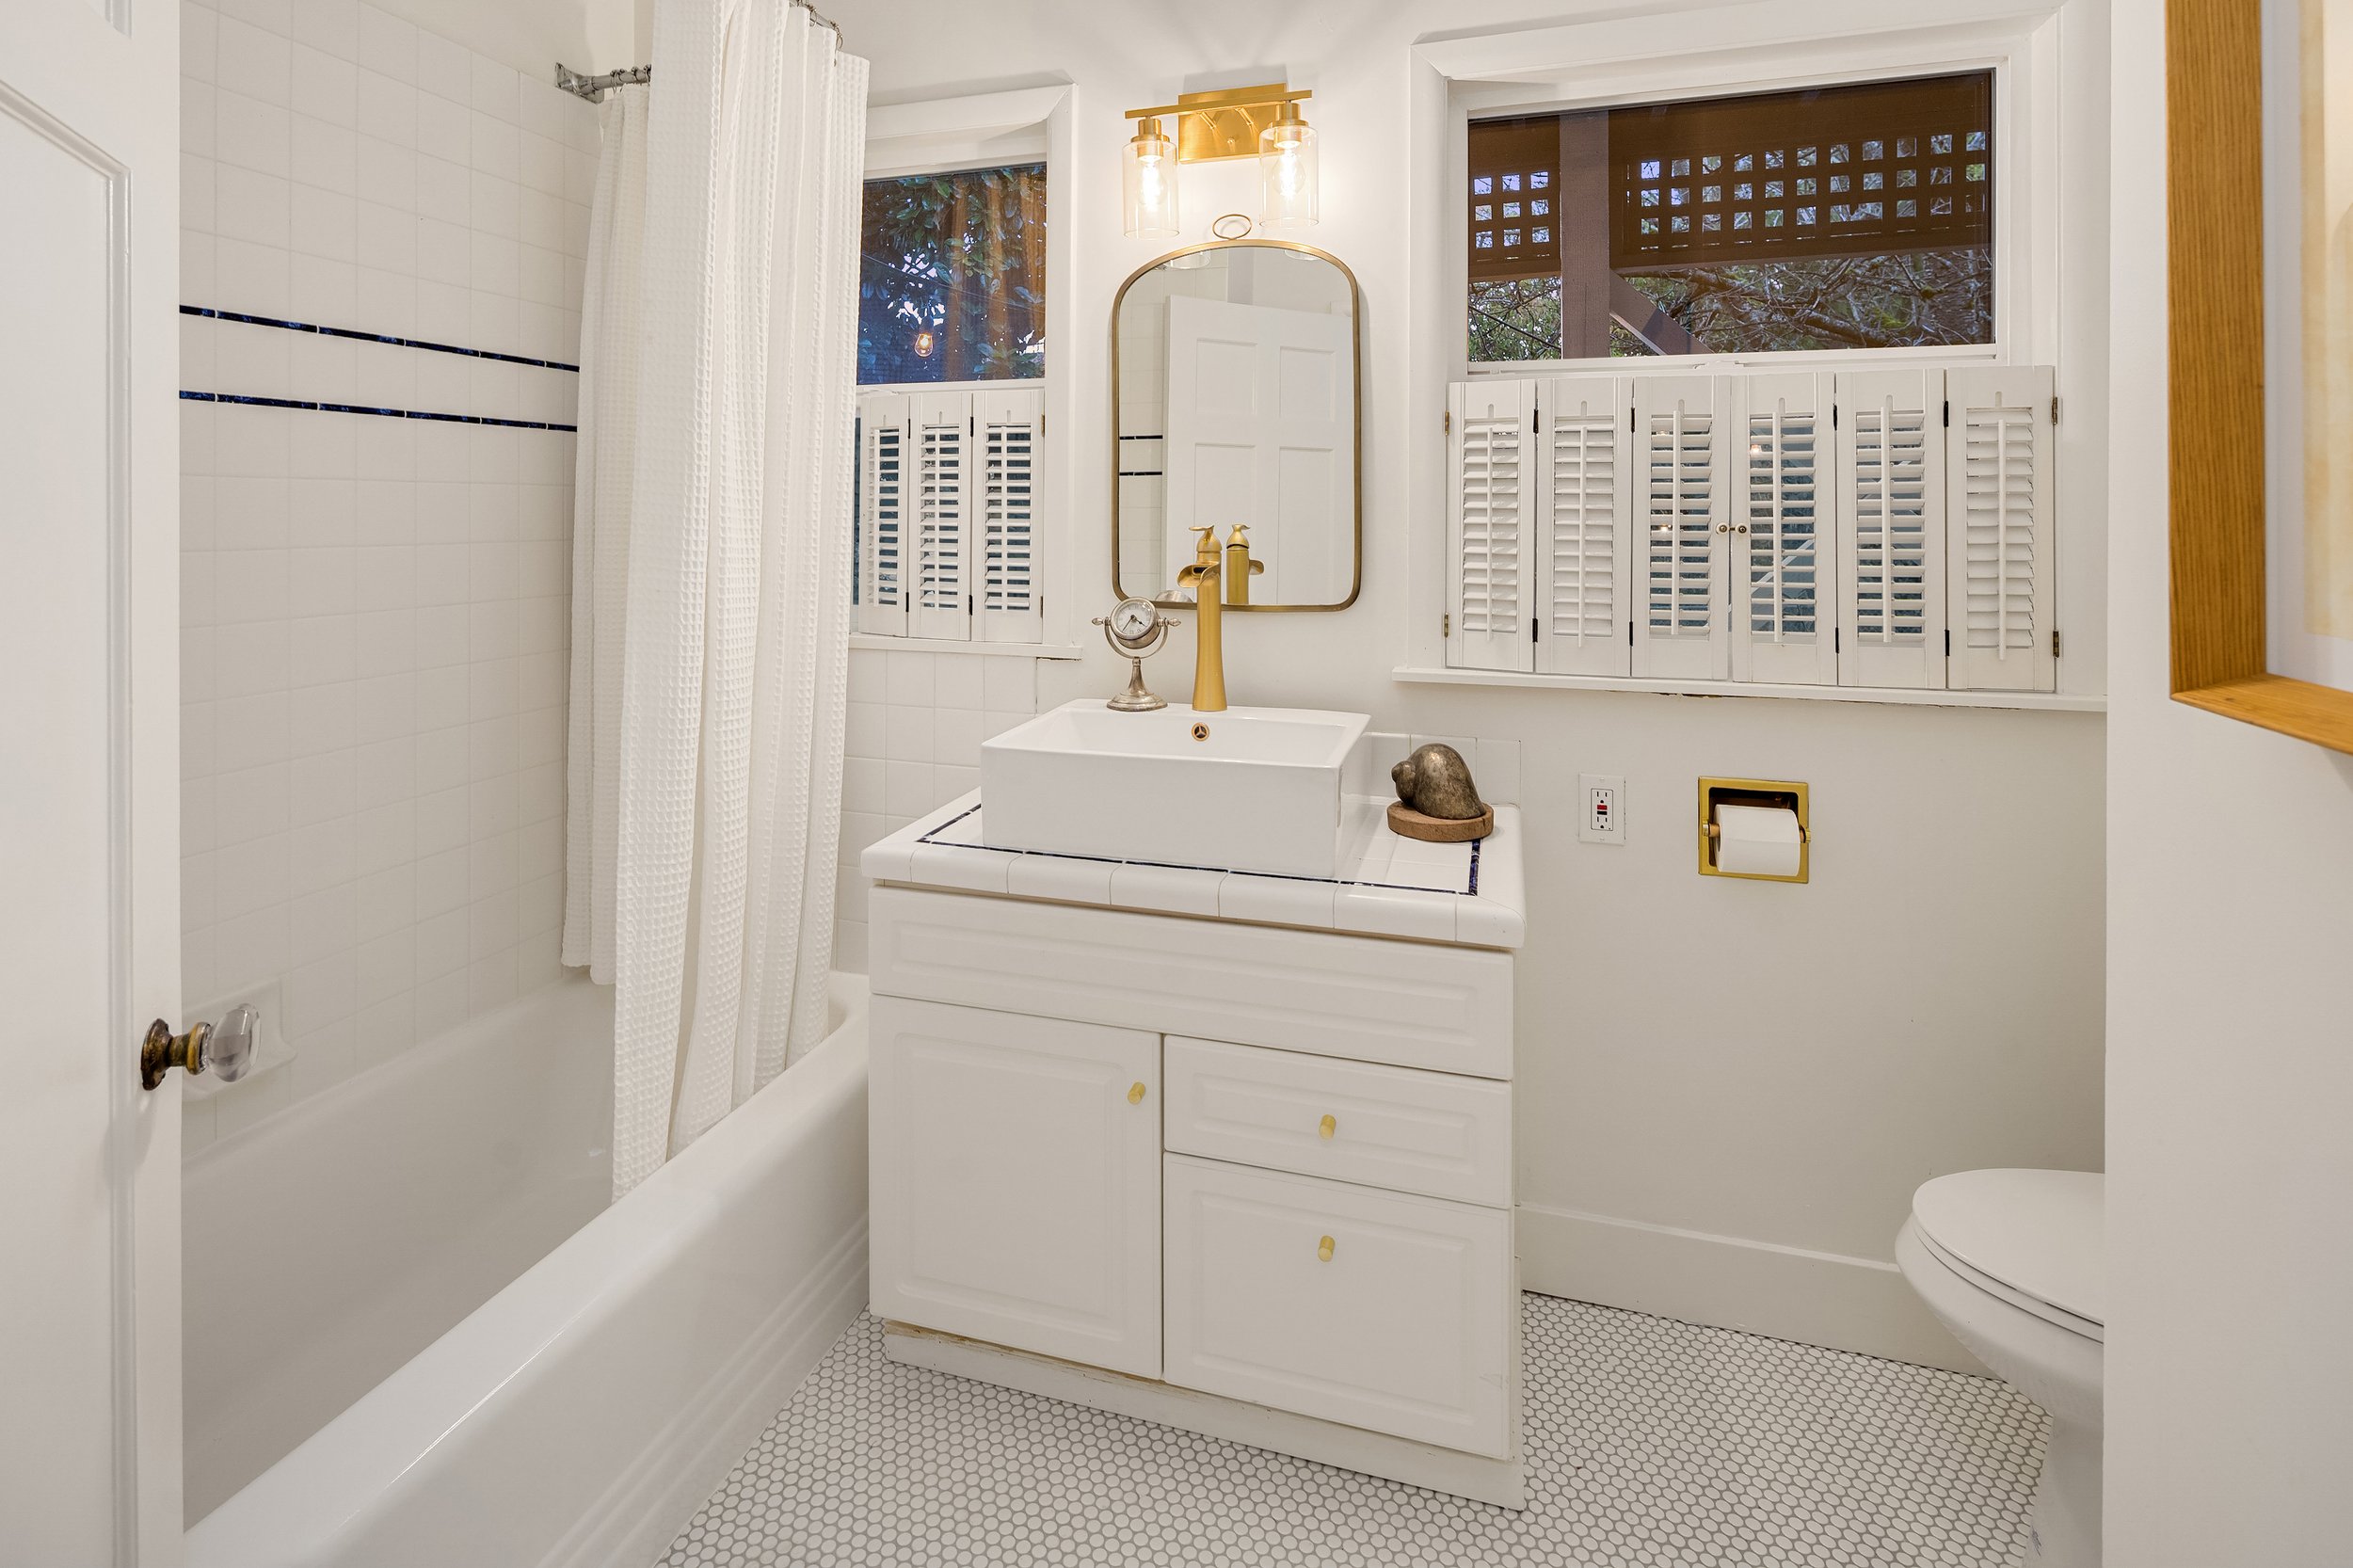  Recently updated with classic details to complement the home. This full bath on the main floor serves as powder room for guests and the 2 main floor bedrooms. 